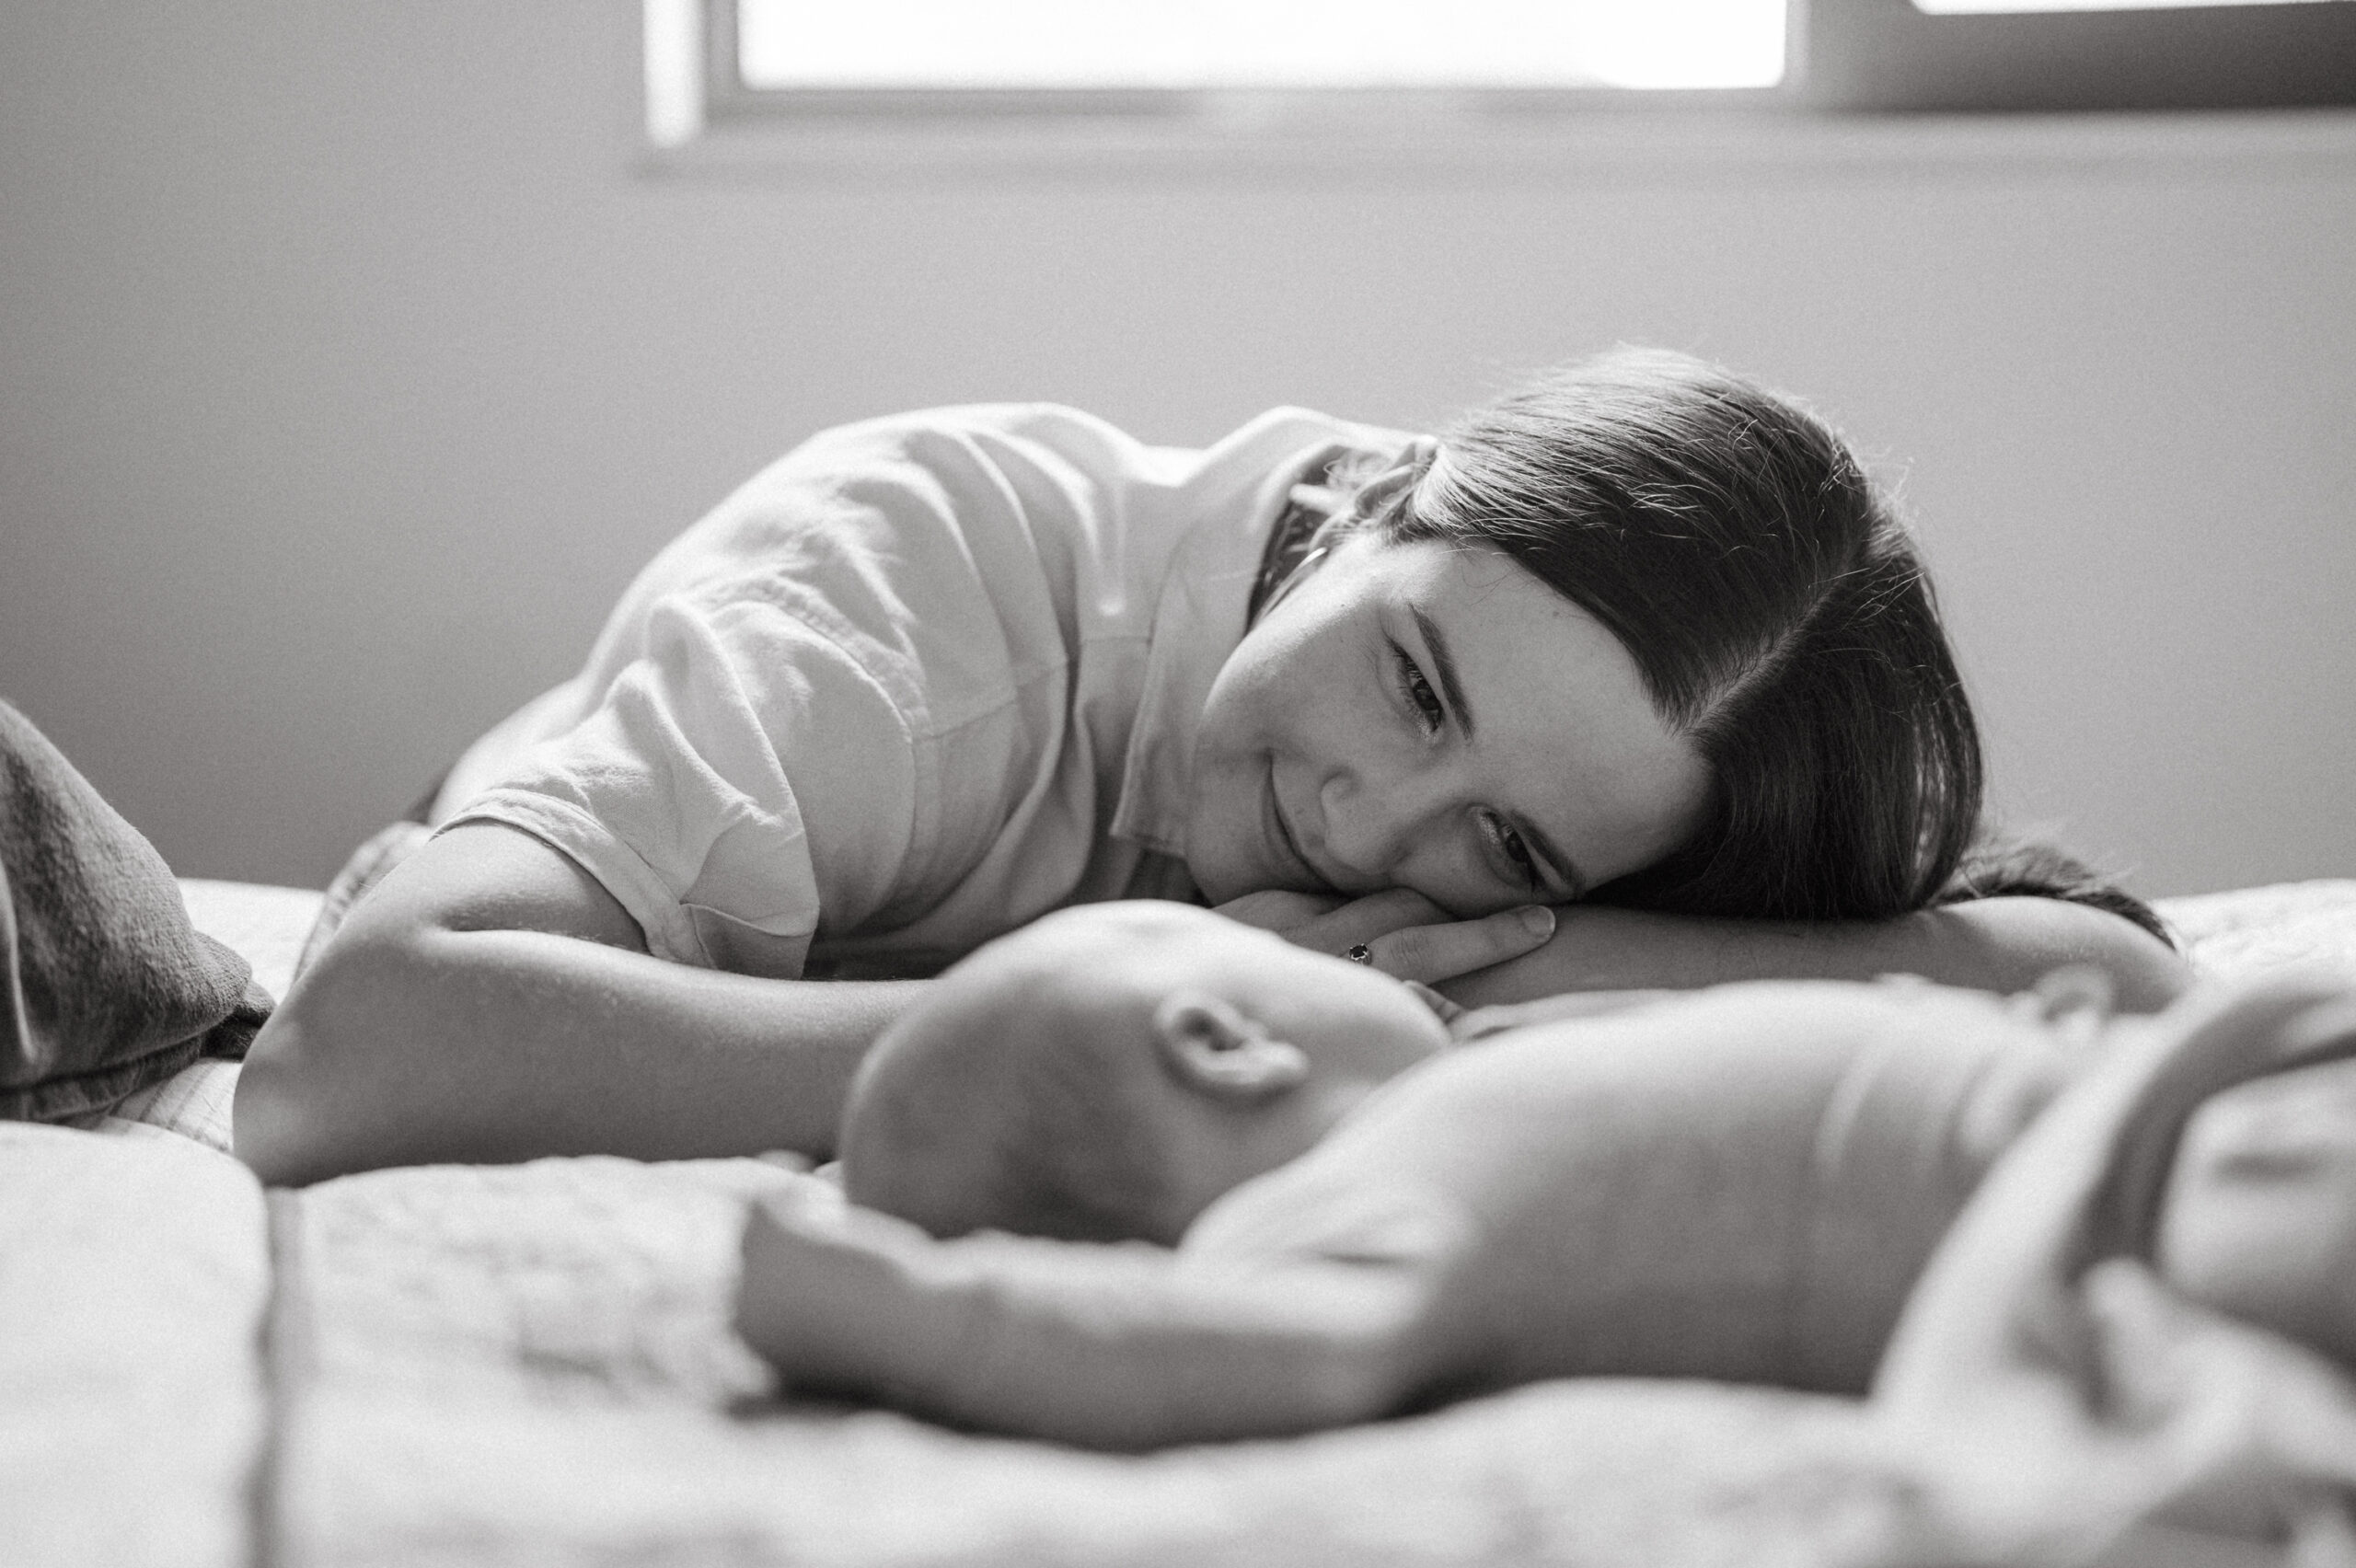 New mother looks lovingly at her newborn in a black and white photo.